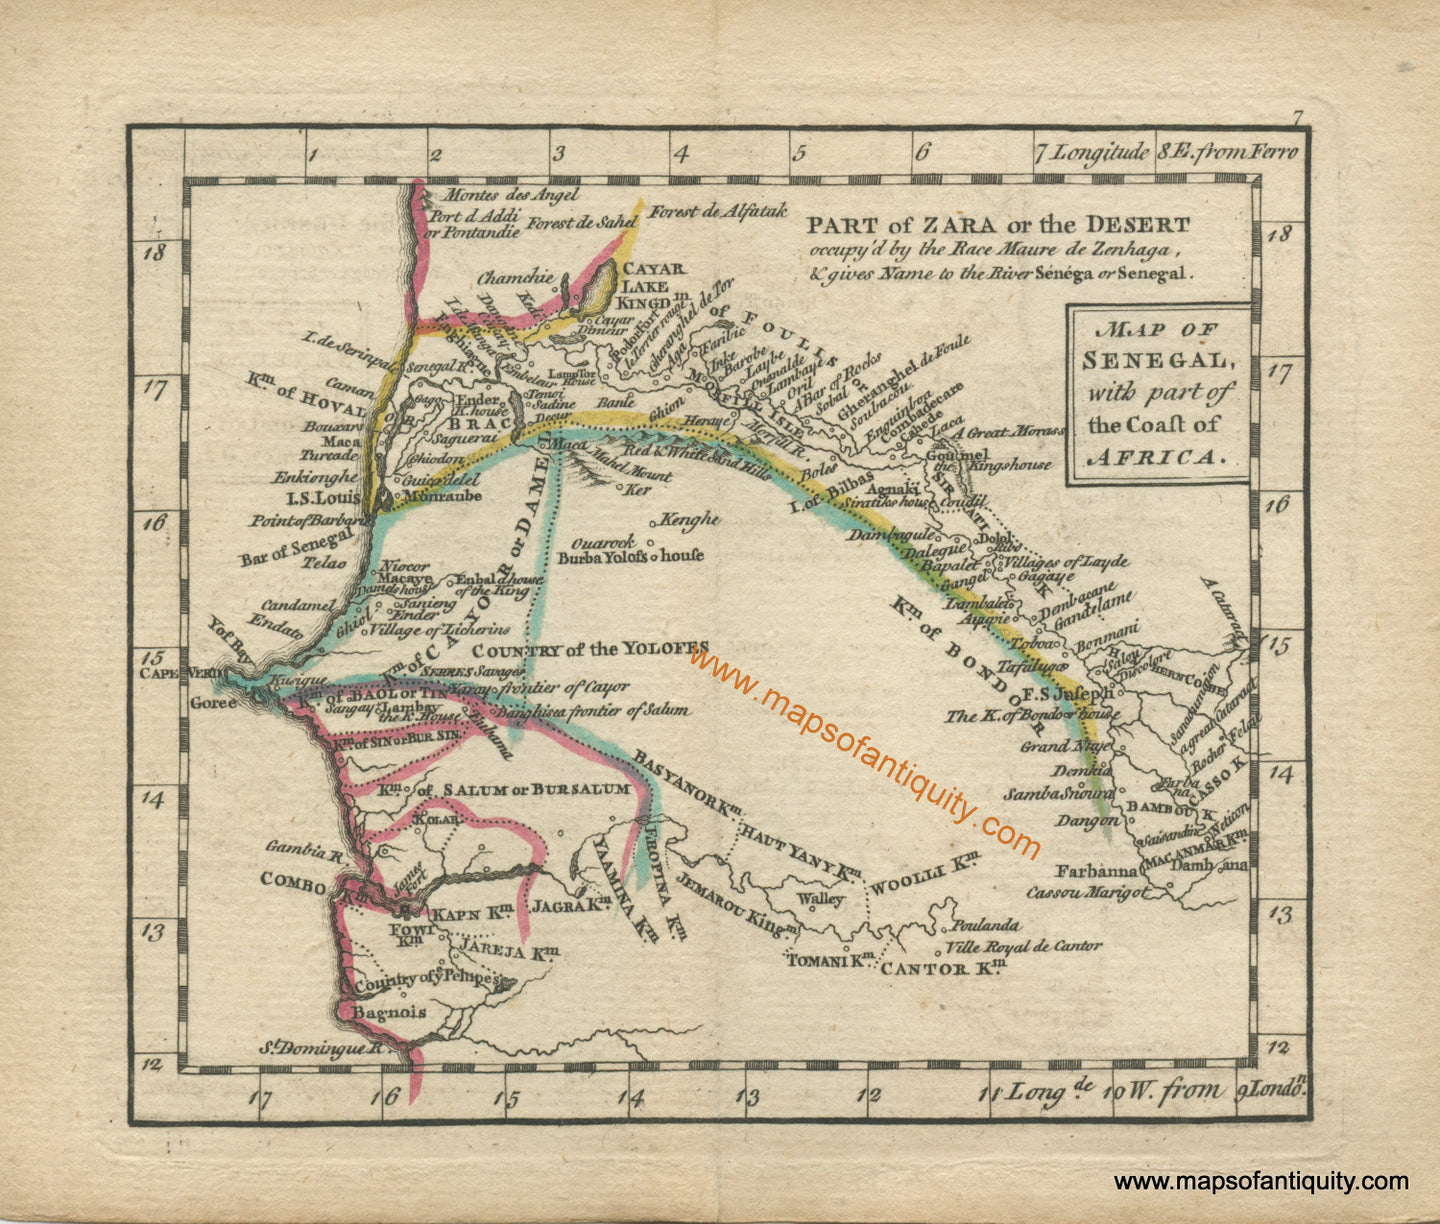 Antique-Hand-Colored-Map-Map-of-Senegal-with-part-of-the-Coast-of-Africa-Africa--1761-Dury-Maps-Of-Antiquity